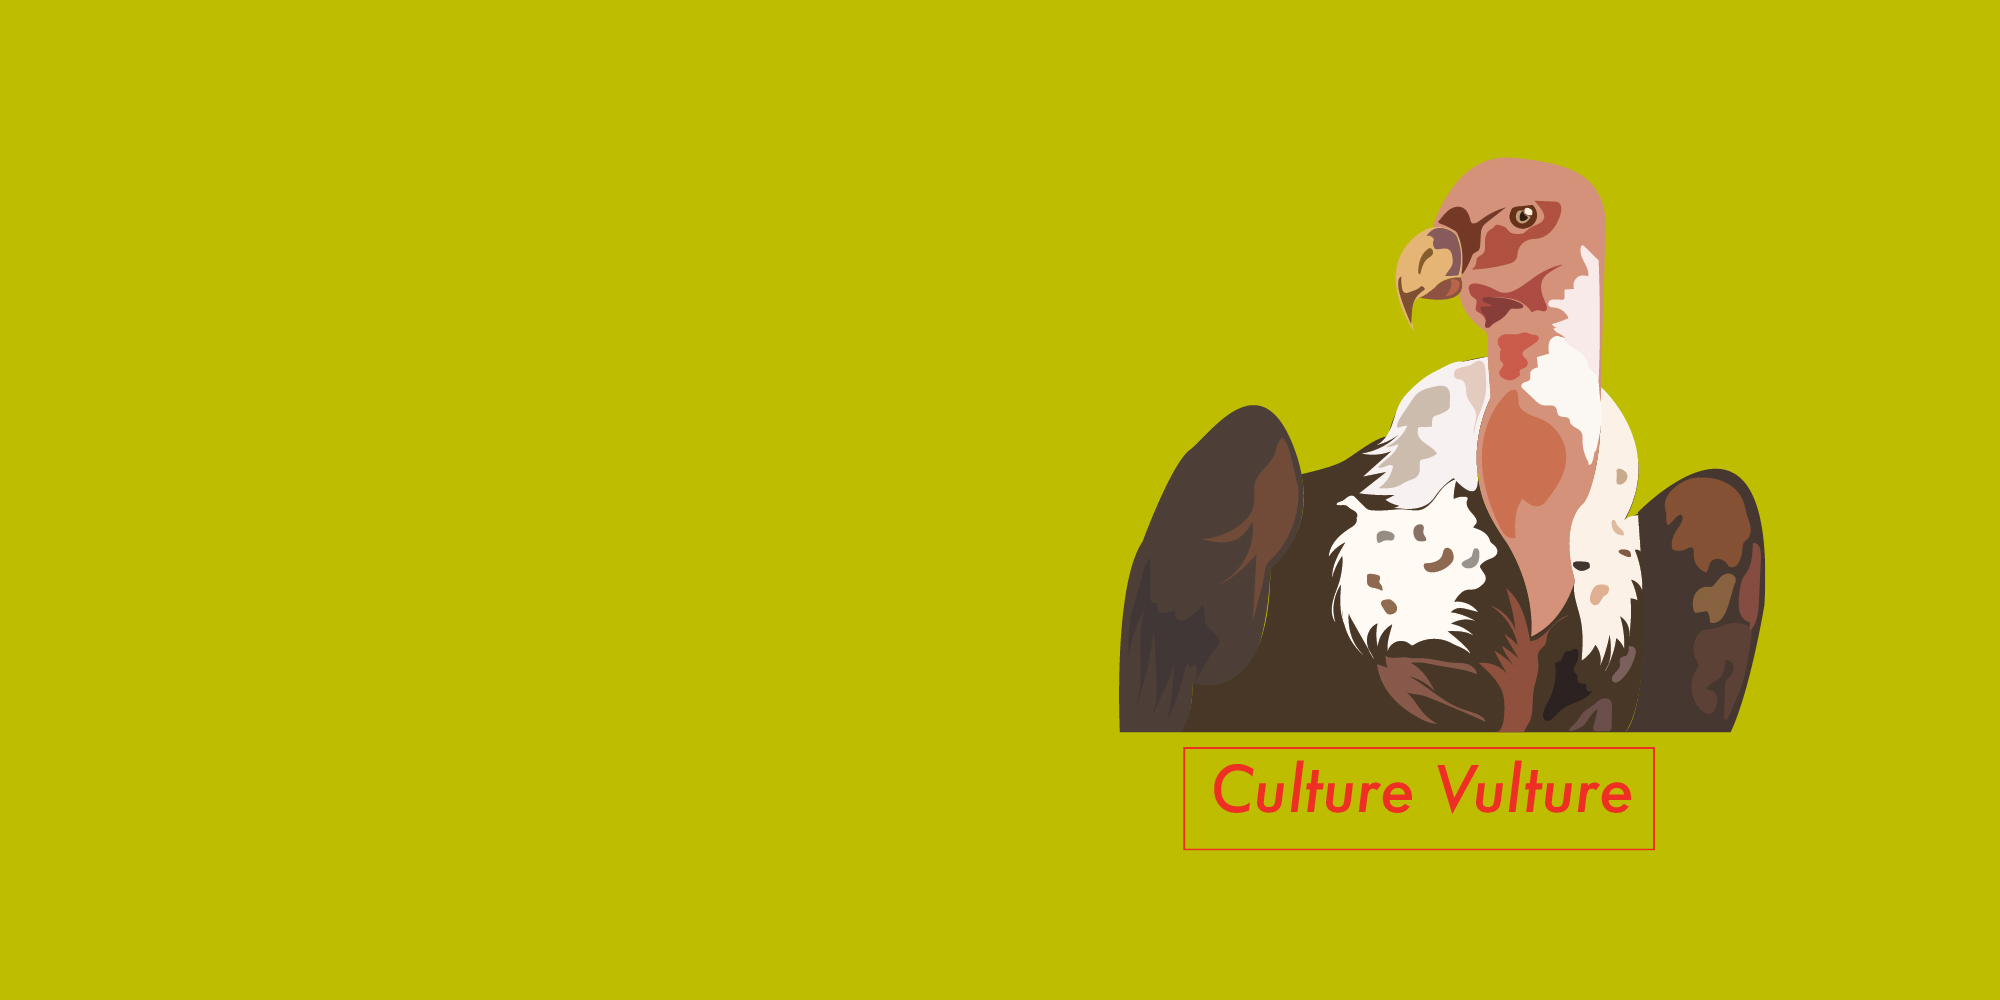 Culture Vulture is a capstone project on the Commoditization of Black Culture, finding the connections between black culture and popular culture